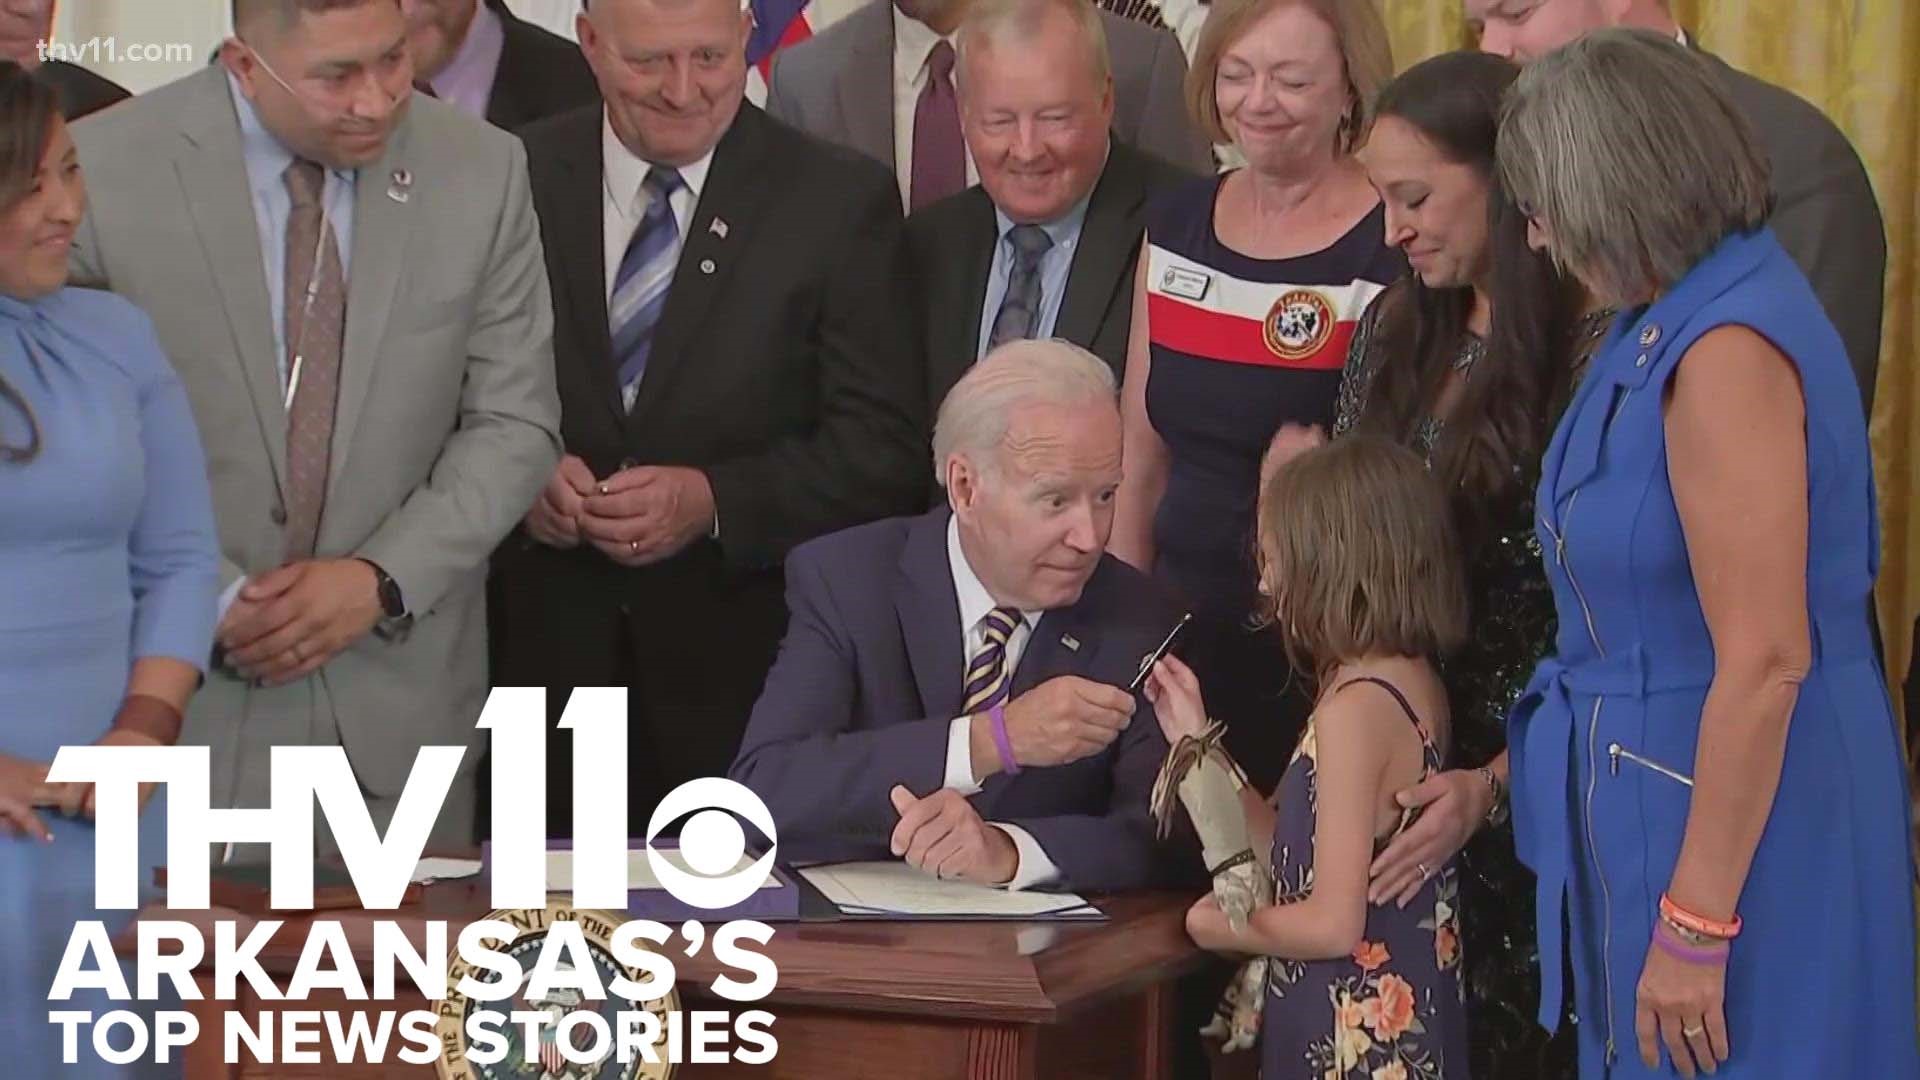 Mackailyn Johnson provides the top news stories for August 10, 2022 including President Biden signing the burn pit bill and the latest on Trump's investigation.